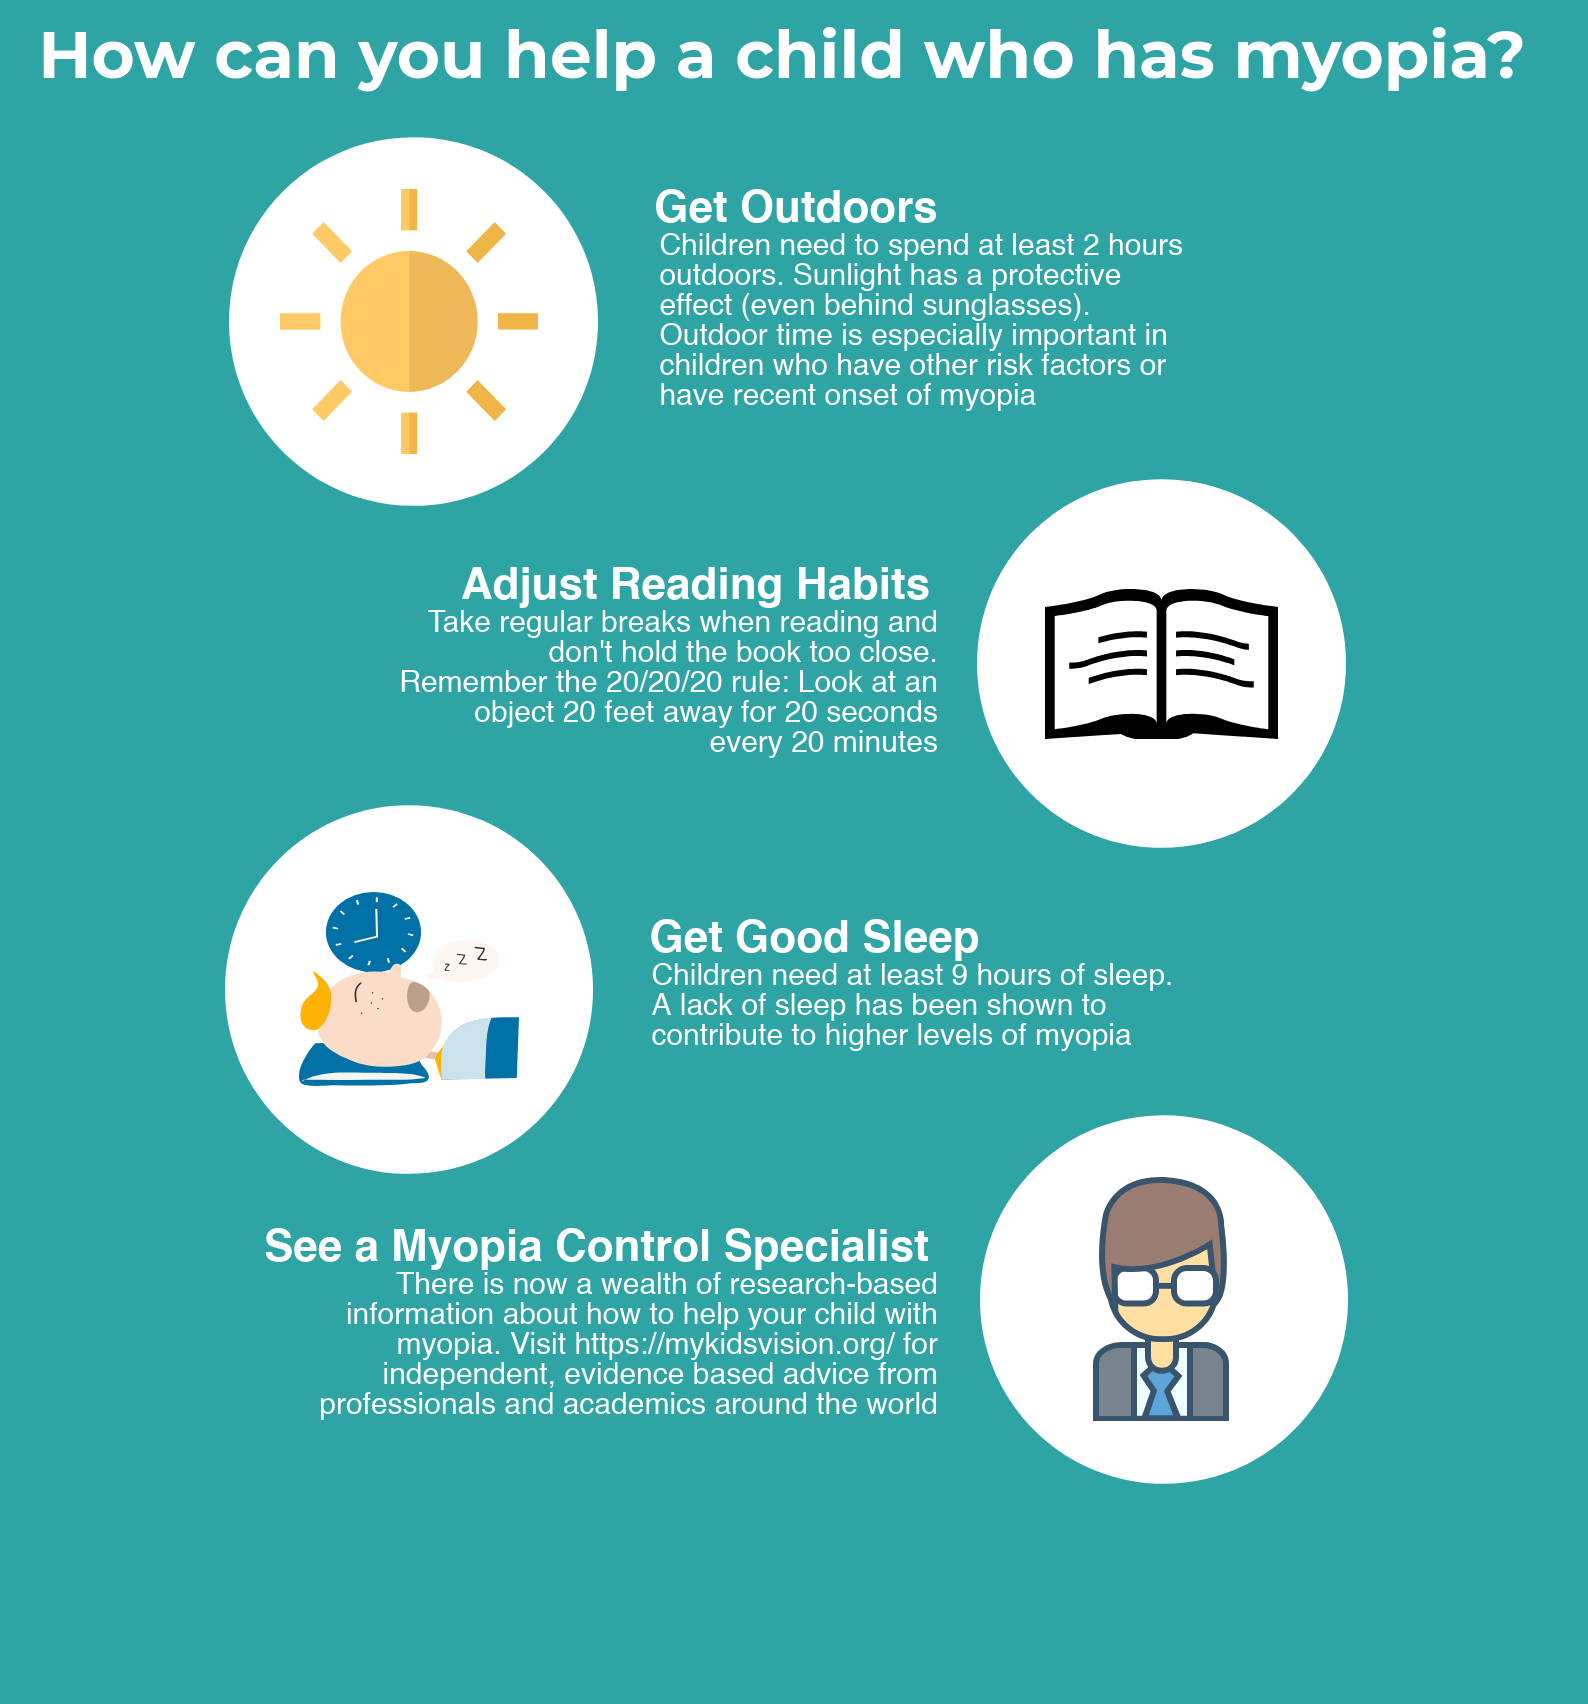 5 tips for helping a child with myopia